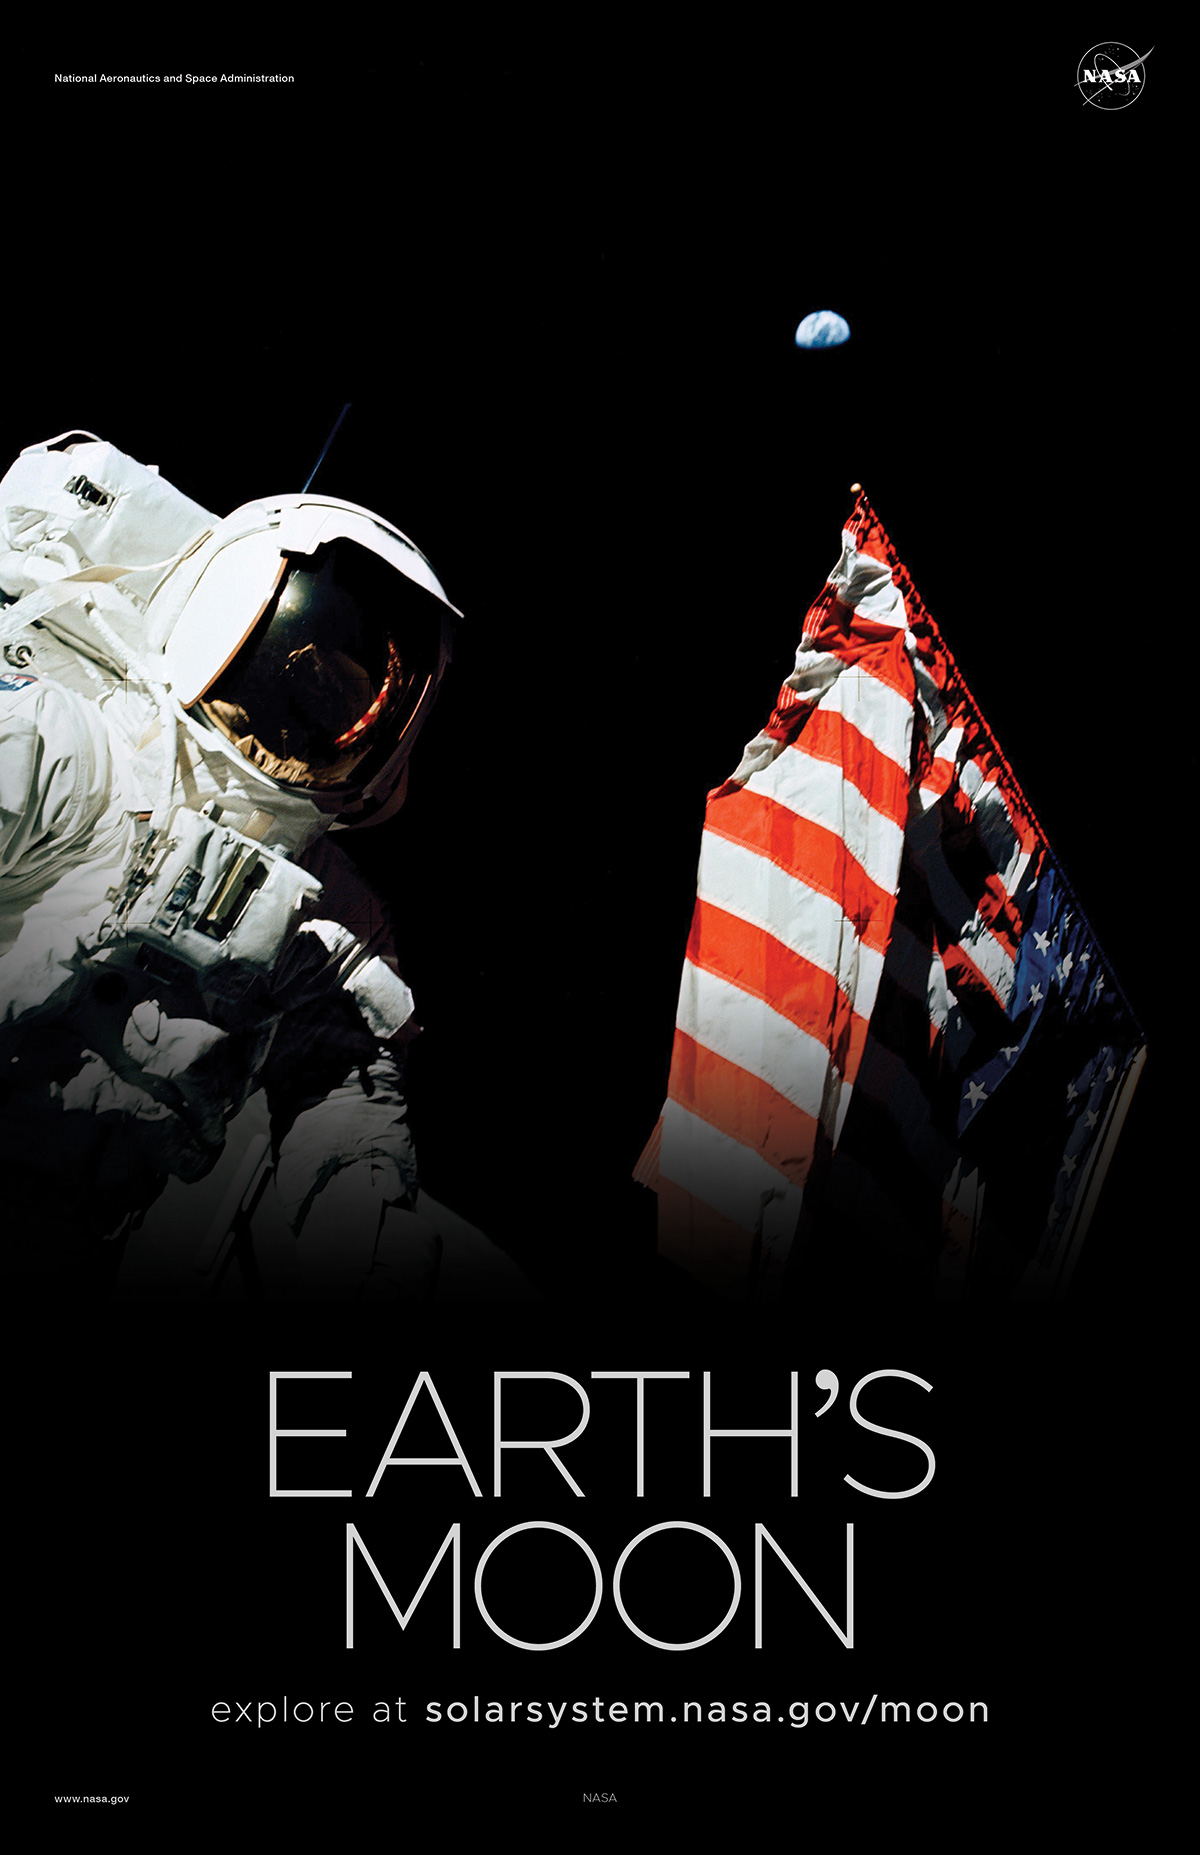 Astronaut and American flag on the Moon with Earth in the sky above.